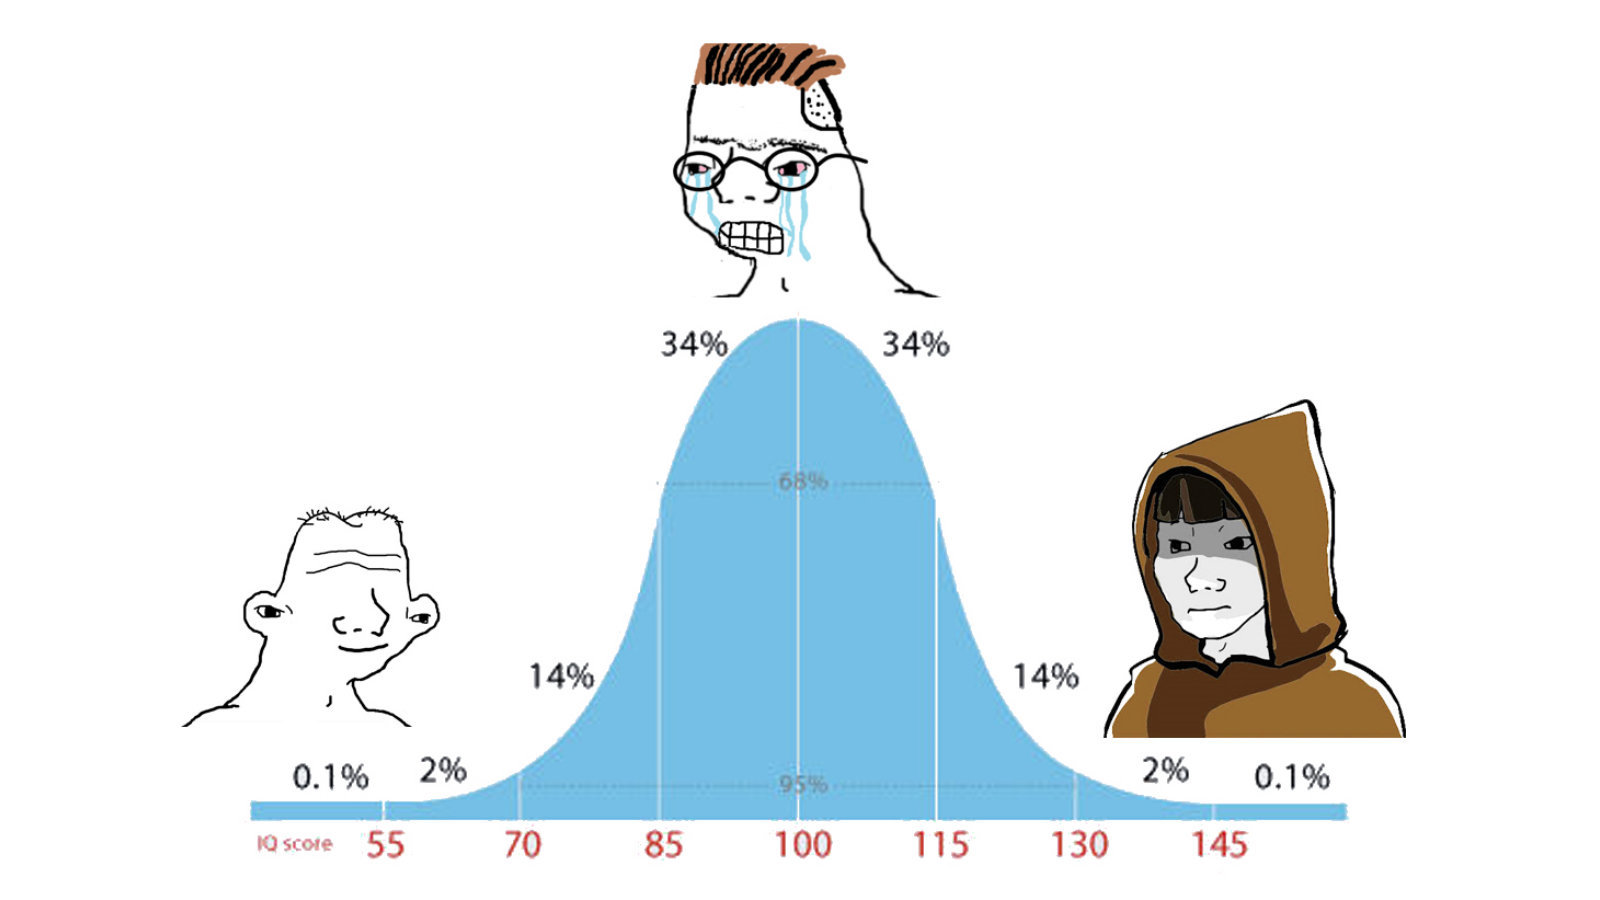 The bell-curve meme where there's a troglodyte-looking Wojak on one end, a Jedi-looking one on the other, and a nerd-looking one in the middle, crying—indicating that the upper and lower bounds of the graph tend to use the same approaches